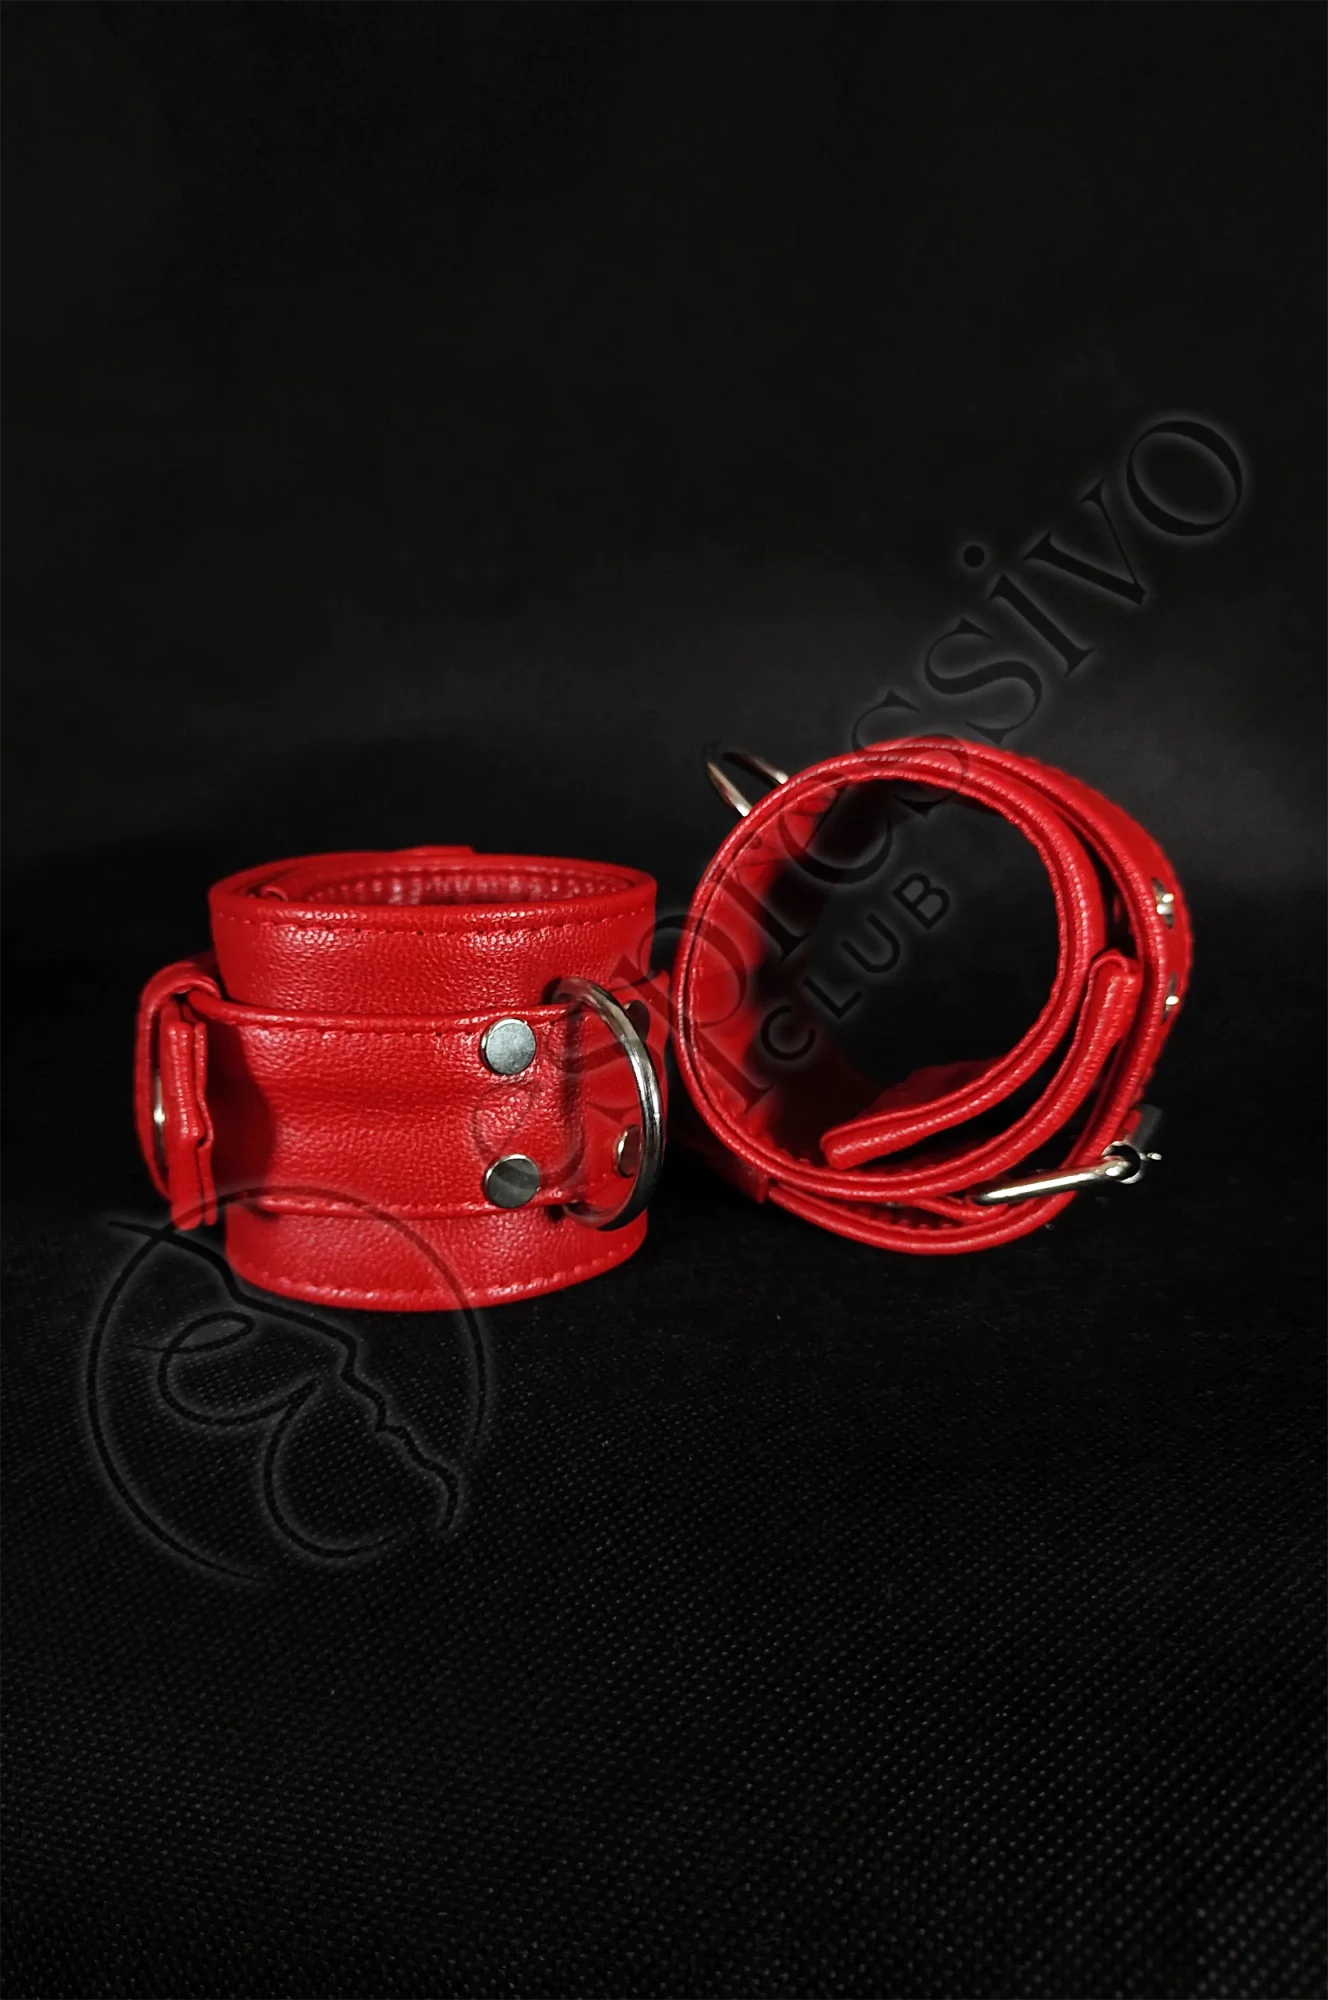 Red Leather Bondage Cuffs - Wrist & Ankle Restraints Limited Edition Cuffs